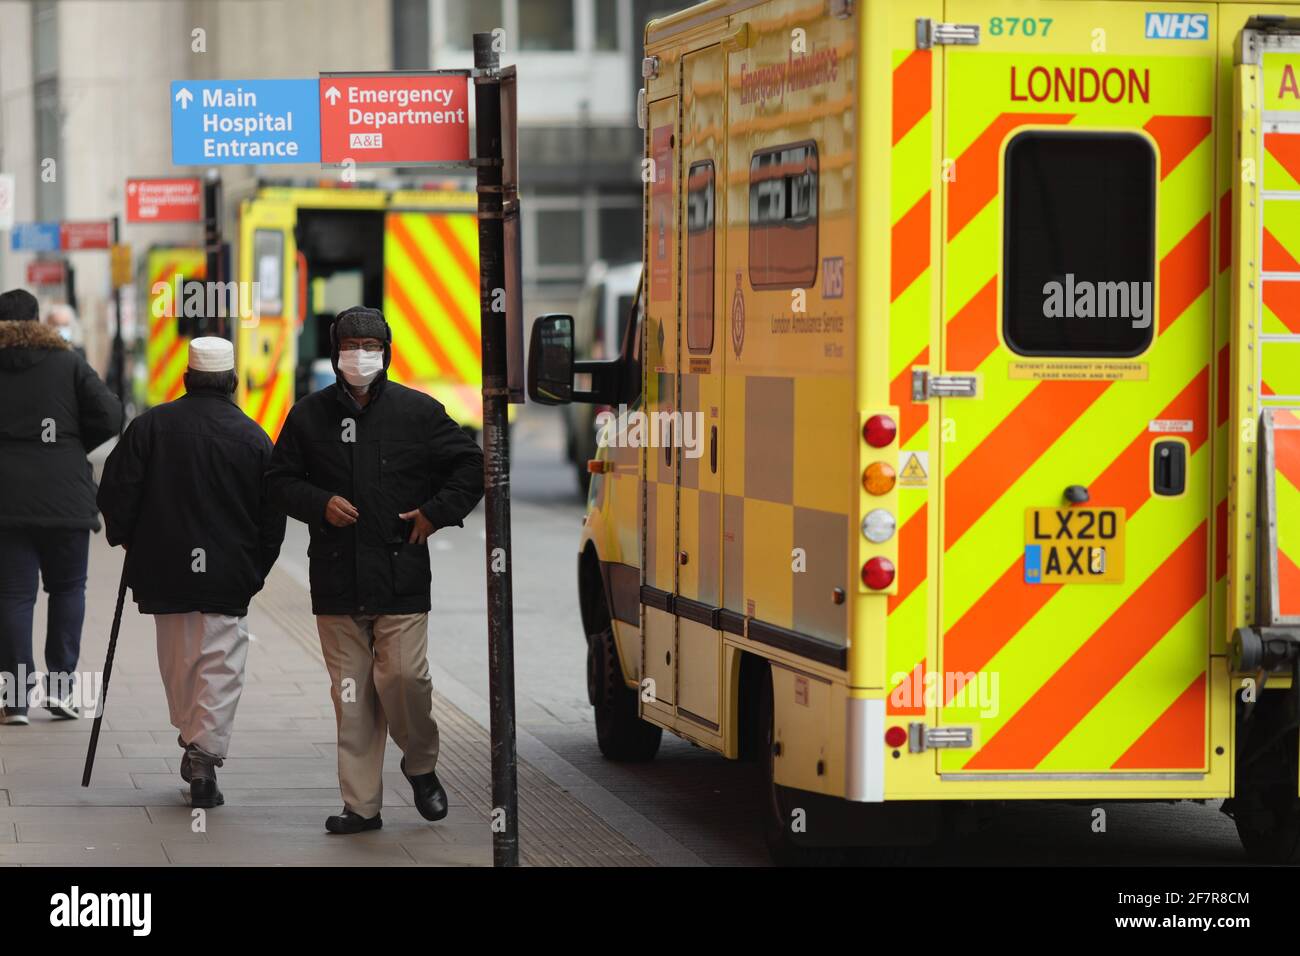 London, Britain. 9th Apr, 2021. People walk past ambulances at the Royal London Hospital in London, Britain, on April 9, 2021. COVID-19 deaths in Europe surpassed the one million mark on Friday, reaching 1,001,313, according to the dashboard of the World Health Organization's Regional Office for Europe. Credit: Tim Ireland/Xinhua/Alamy Live News Stock Photo